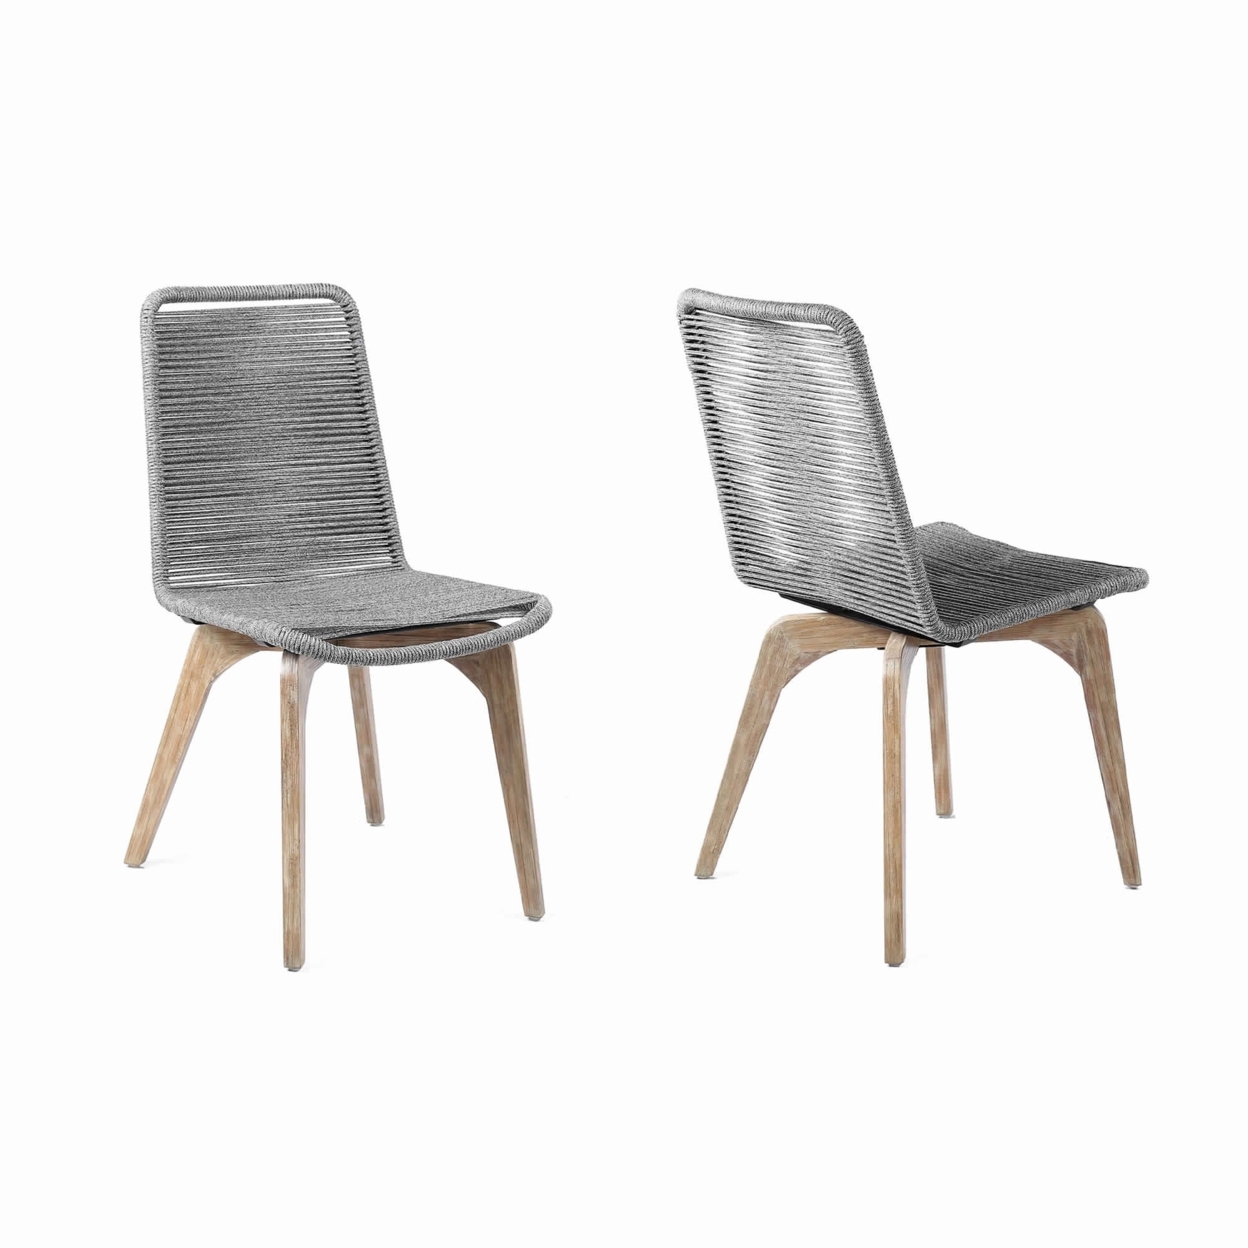 Wooden Outdoor Dining Chair With Fishbone Weave, Set Of 2, Gray- Saltoro Sherpi